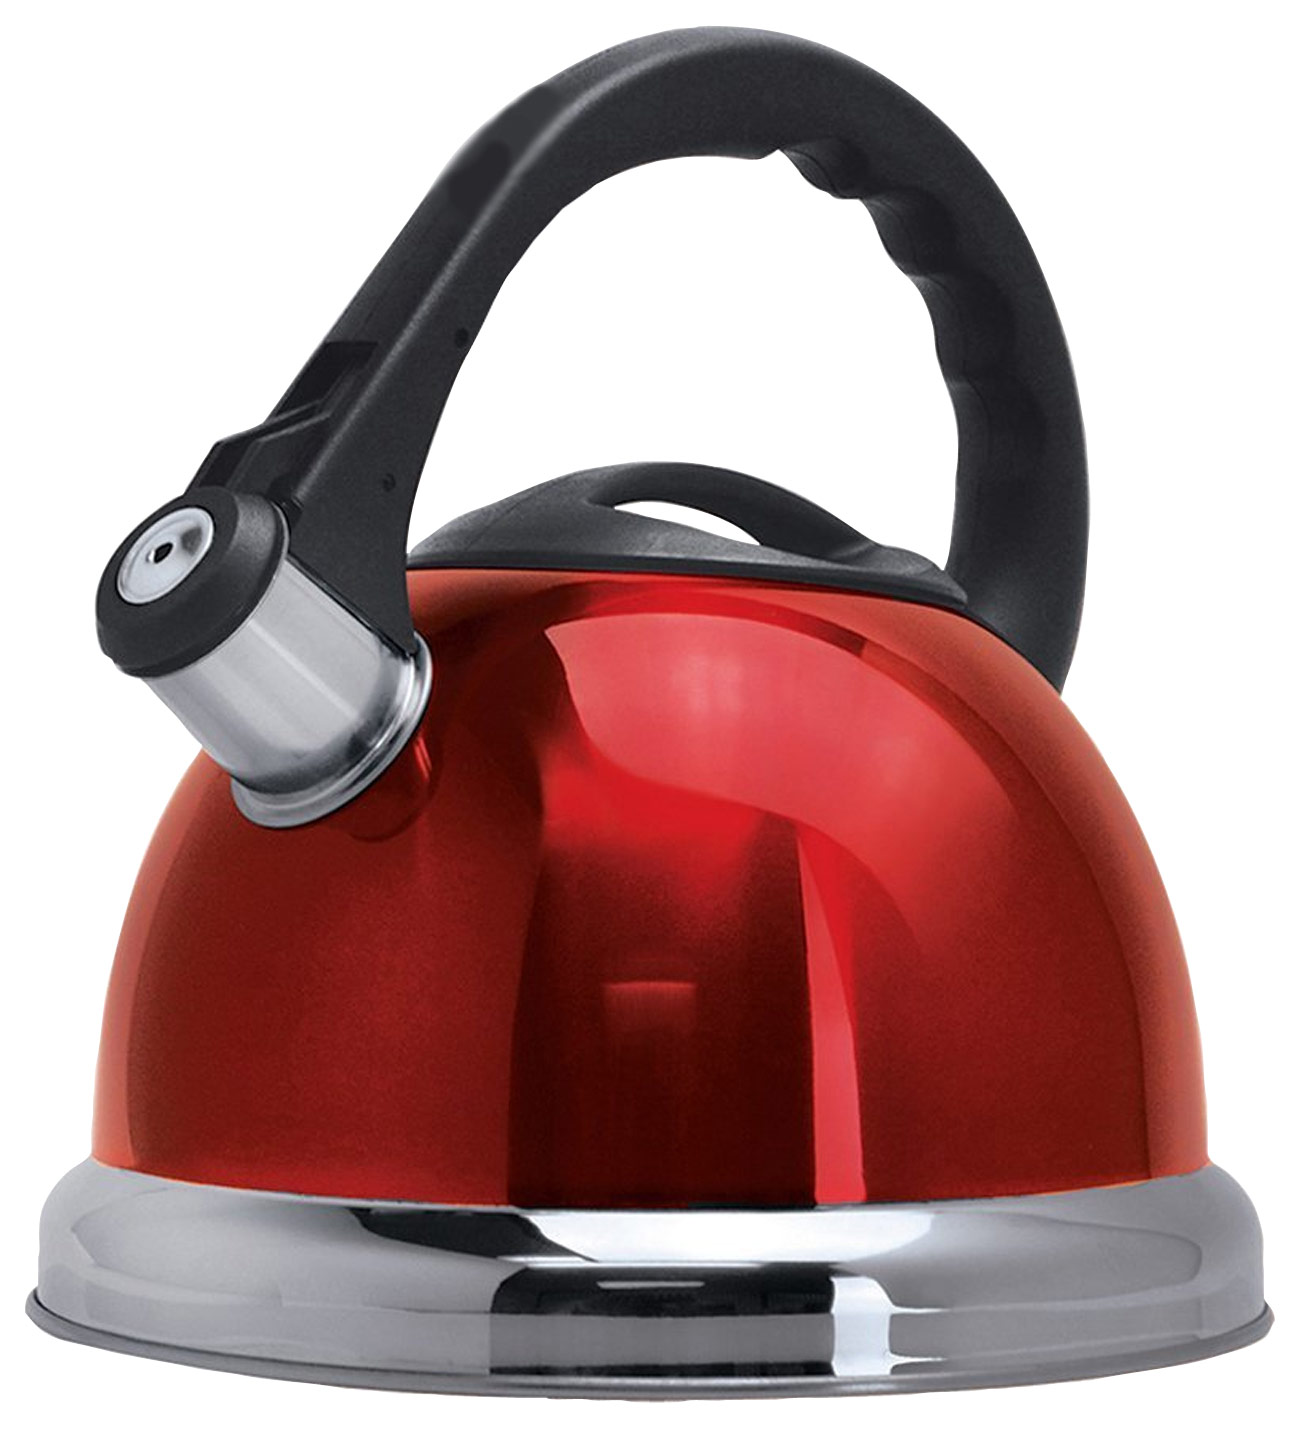 Large Red Round Tea Kettle with Iron Handle 900ml